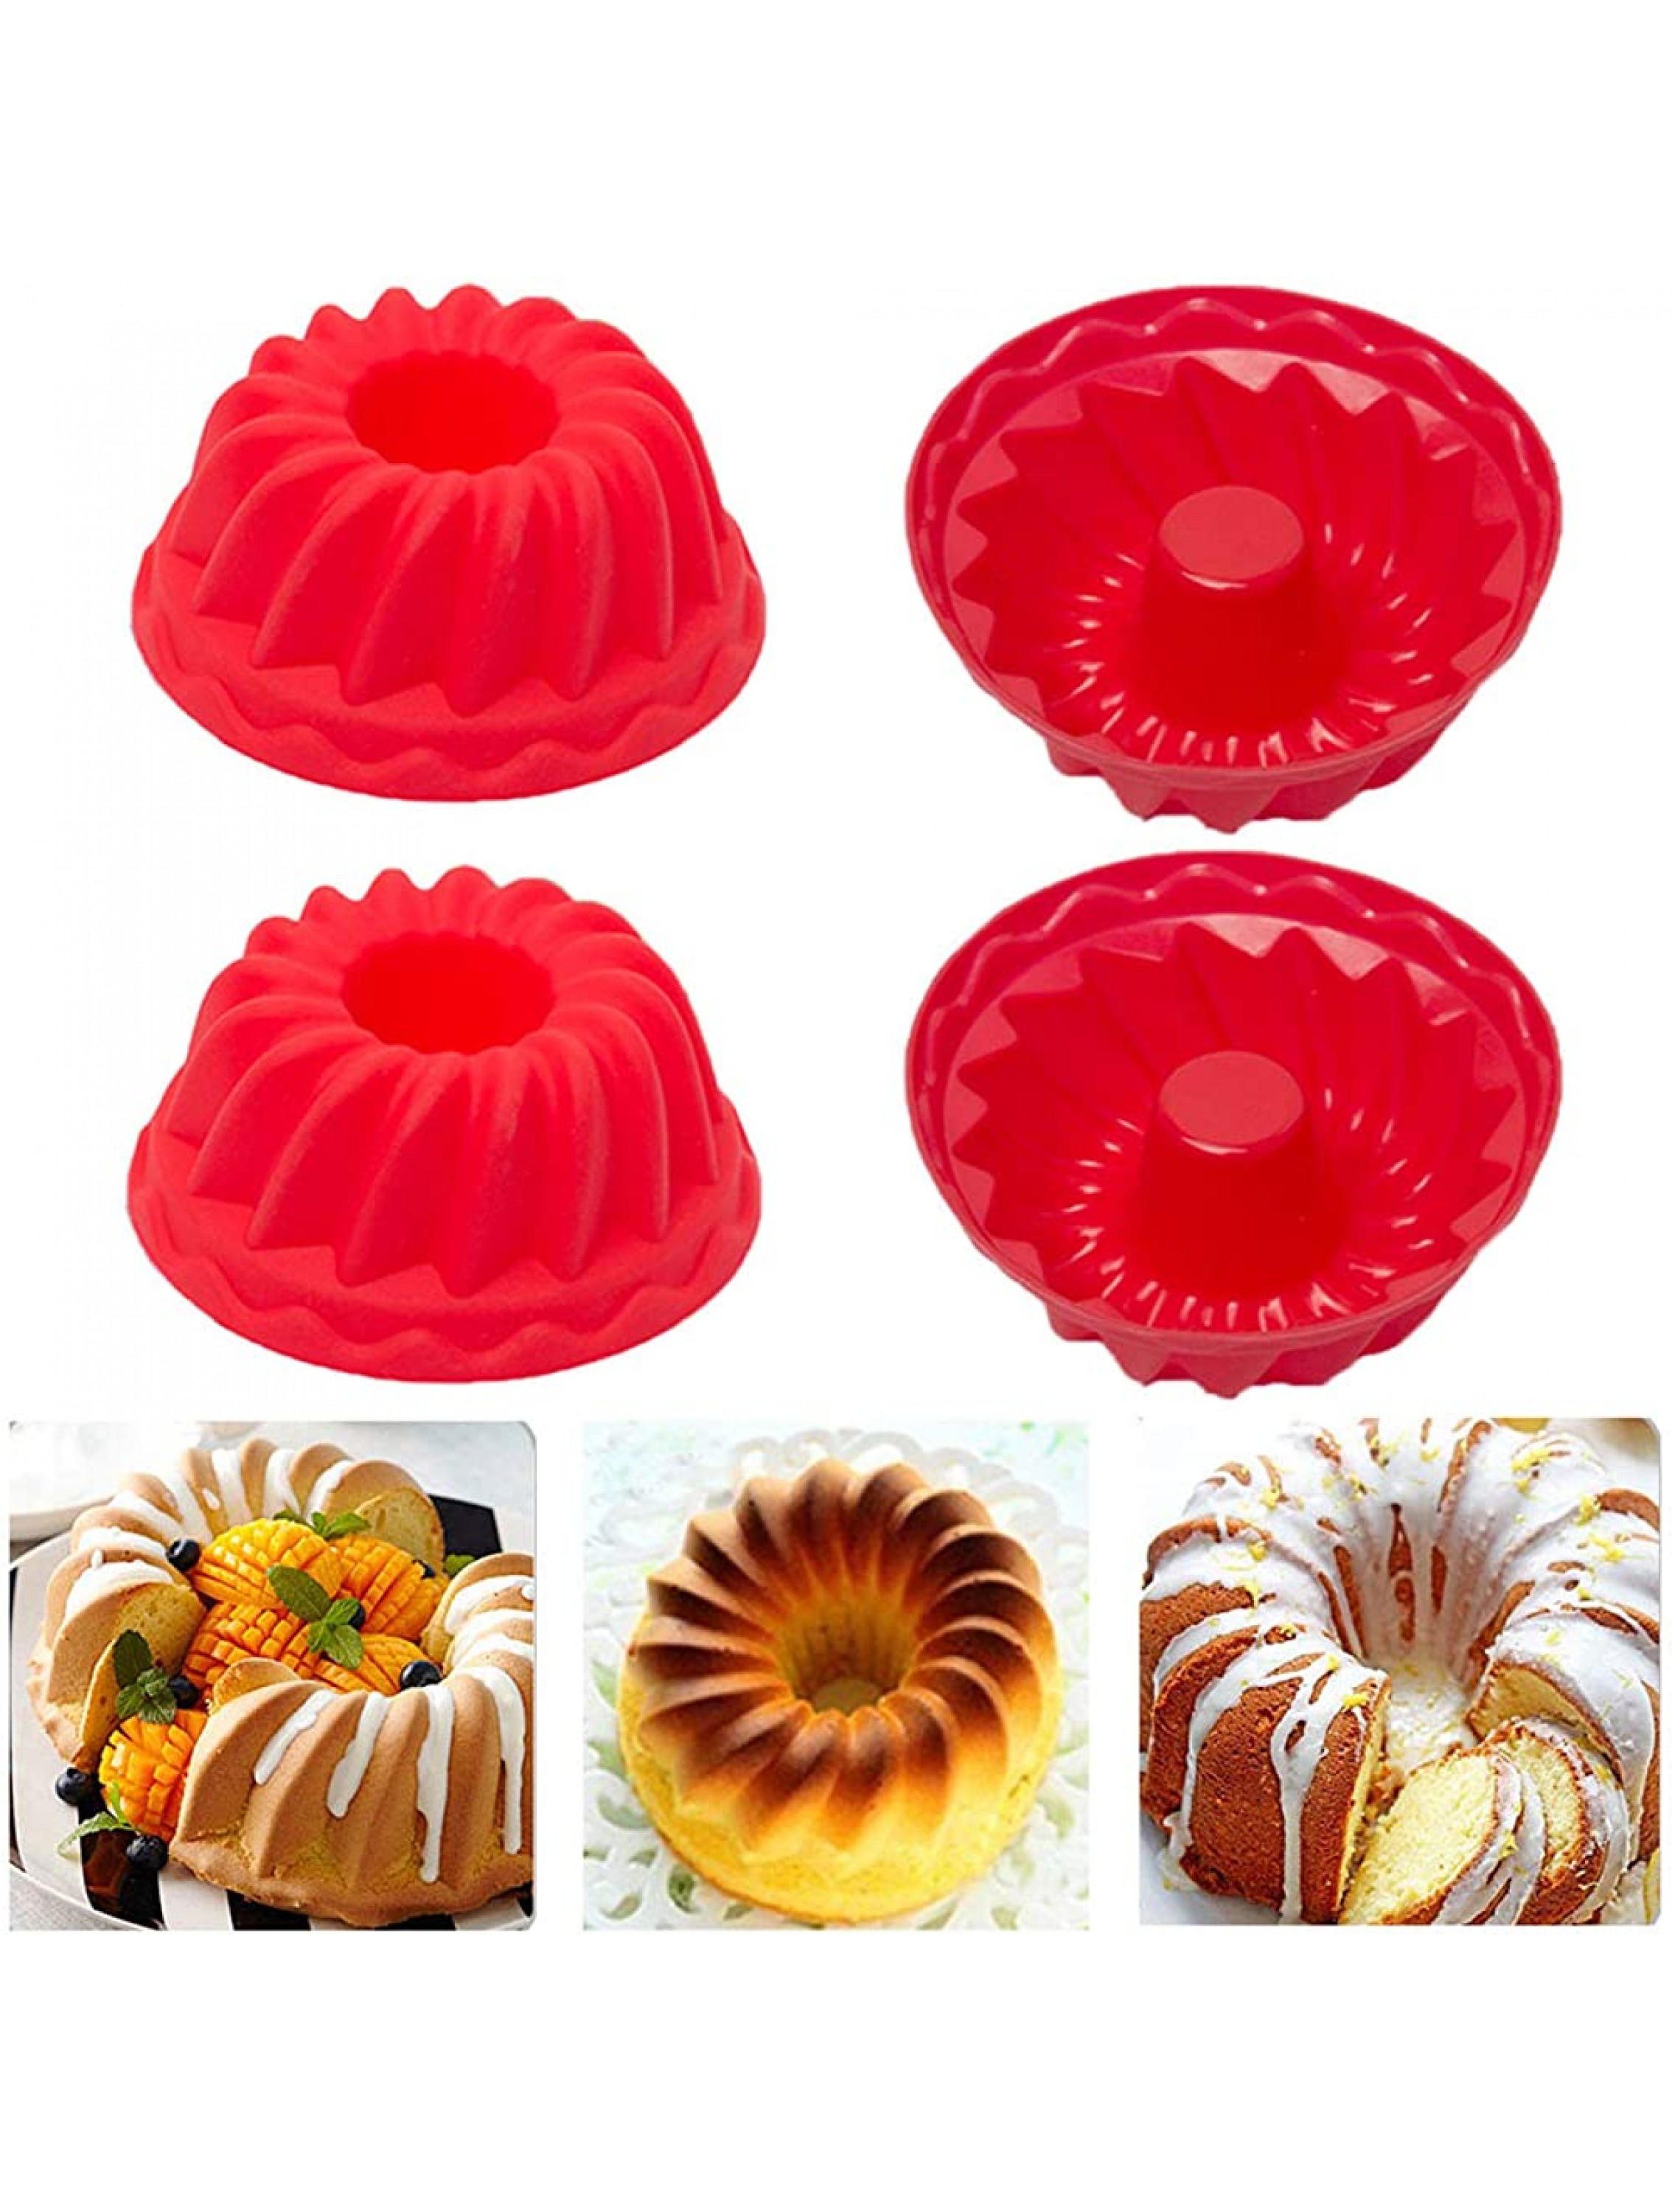 8 Pack Silicone Cake Pan Mini Cake Molds Baking Molds Nonstick Jello Fulted Flexible Ring Mold for Baking Red - BK1RMXJ47